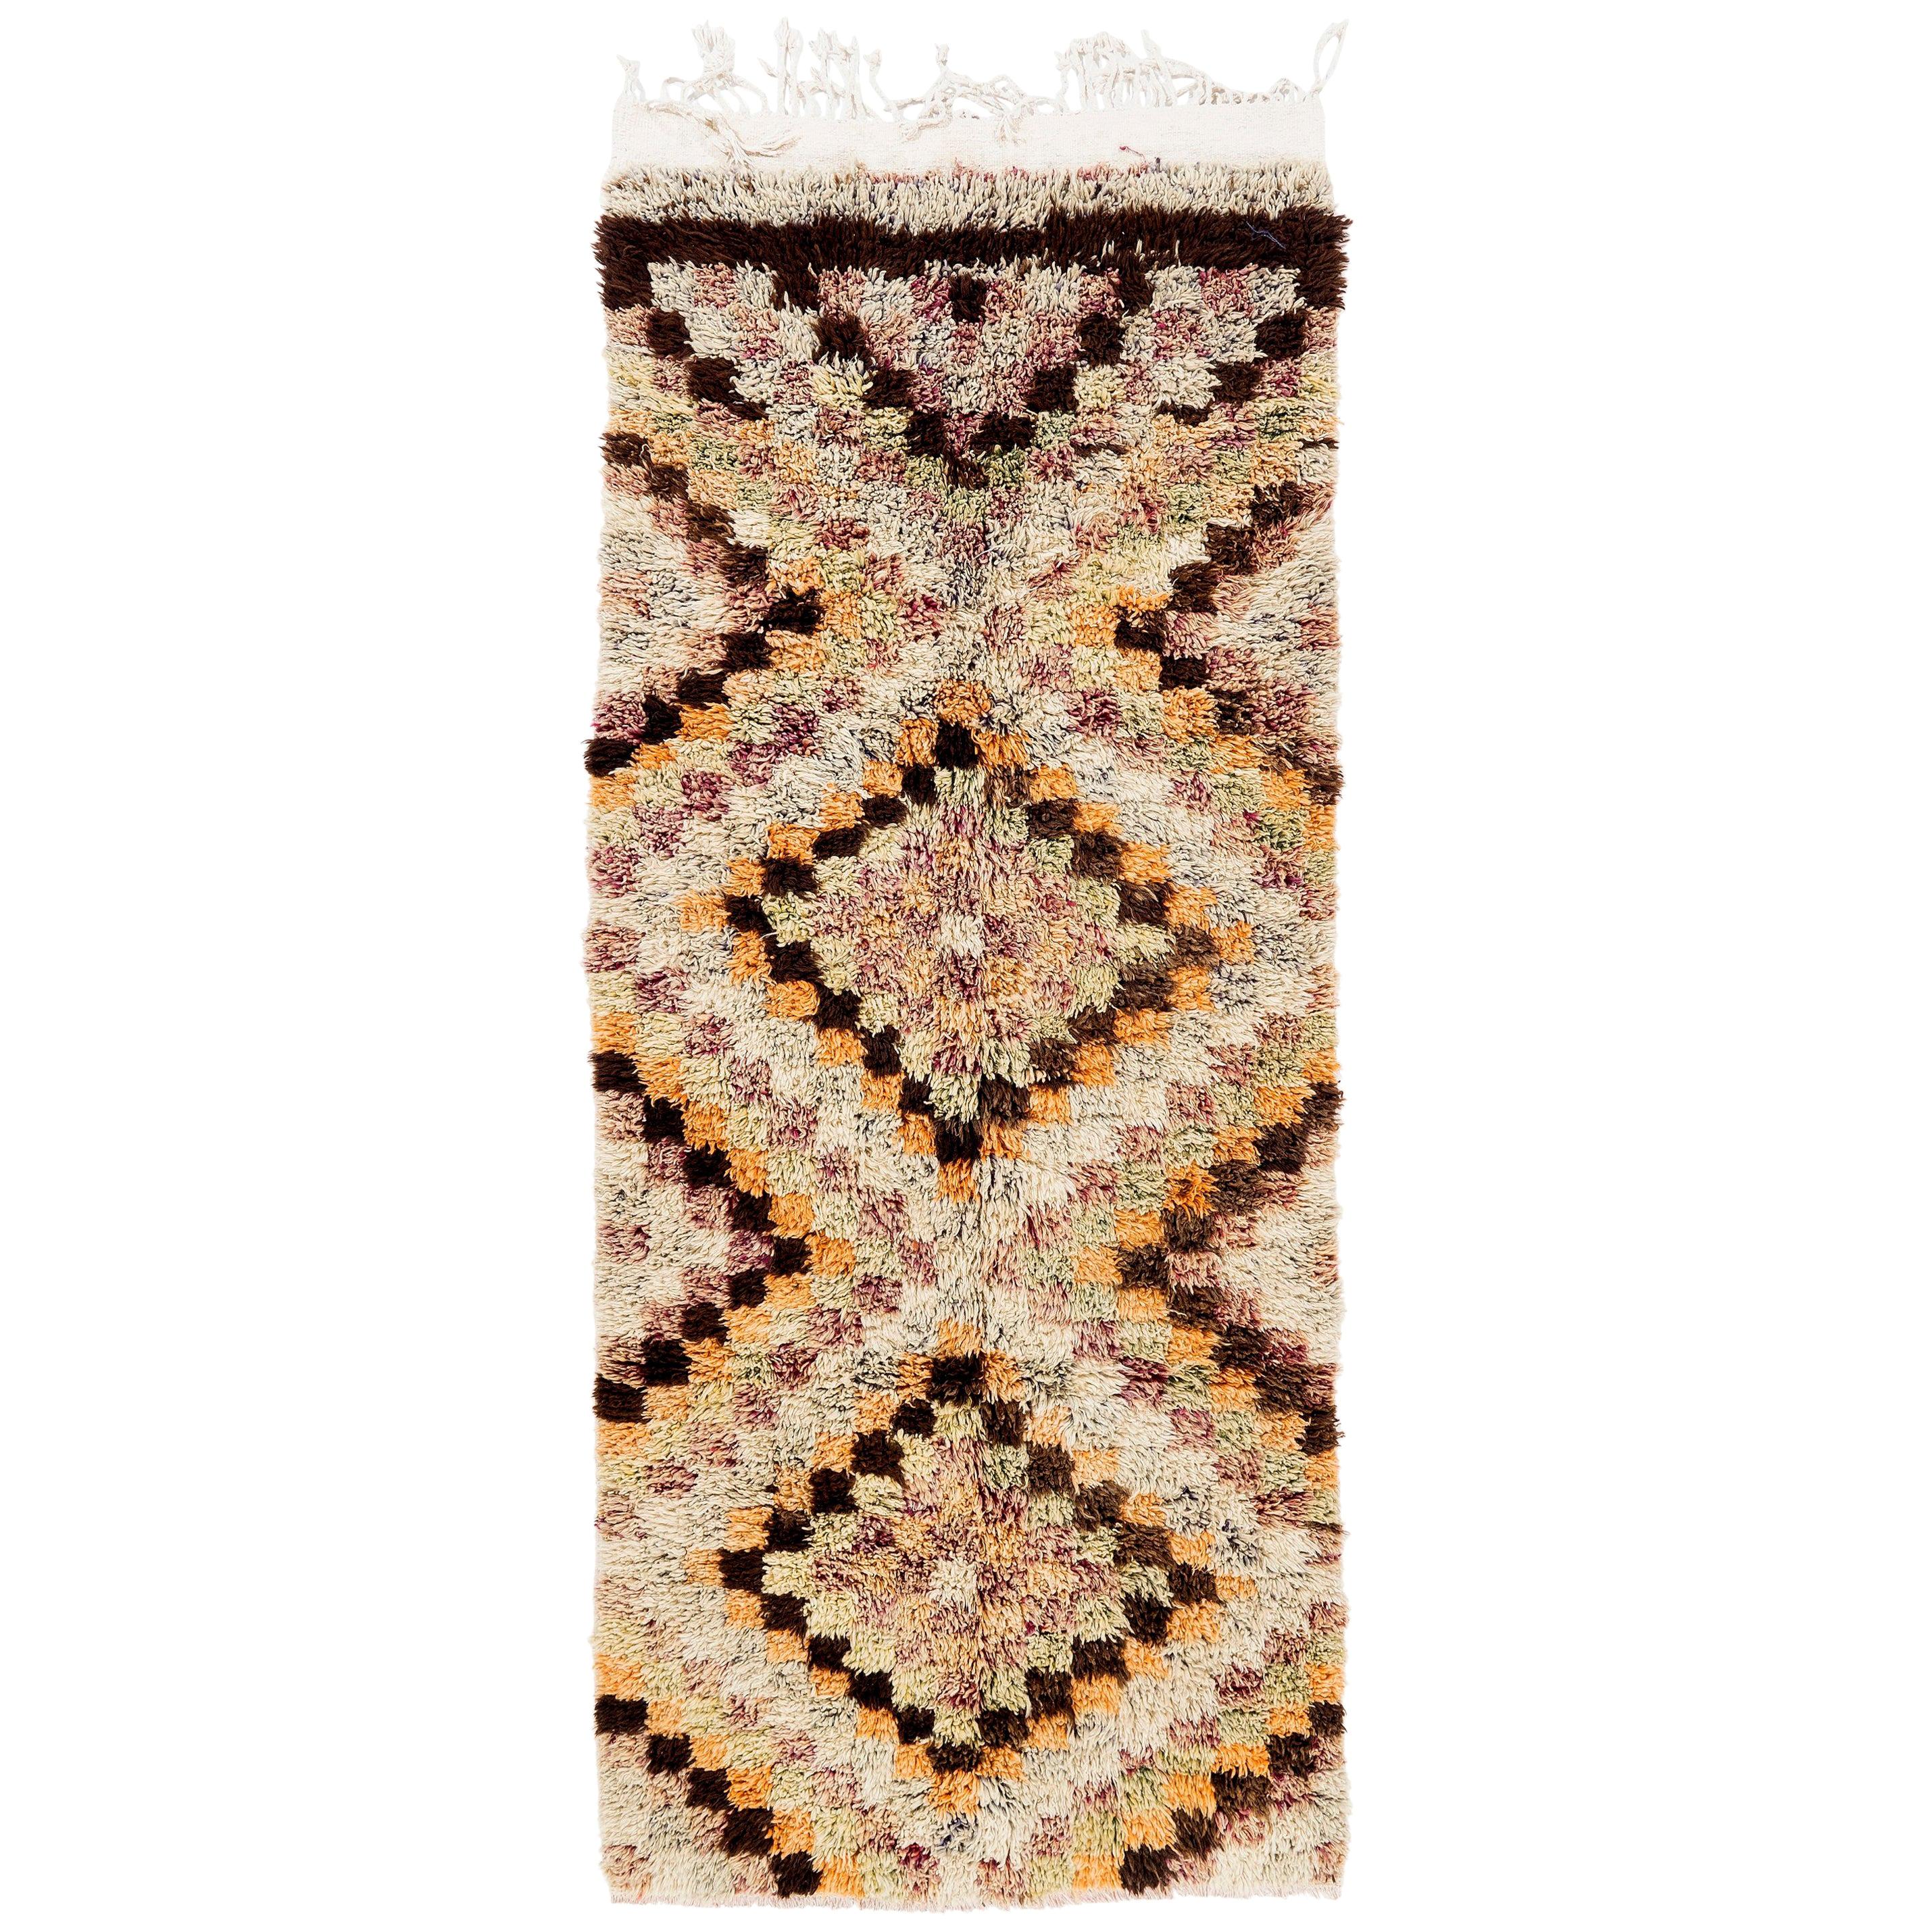 4x10 Ft Vintage Tulu Runner Rug with Checkered Design, Wool Hand-Knotted Carpet For Sale